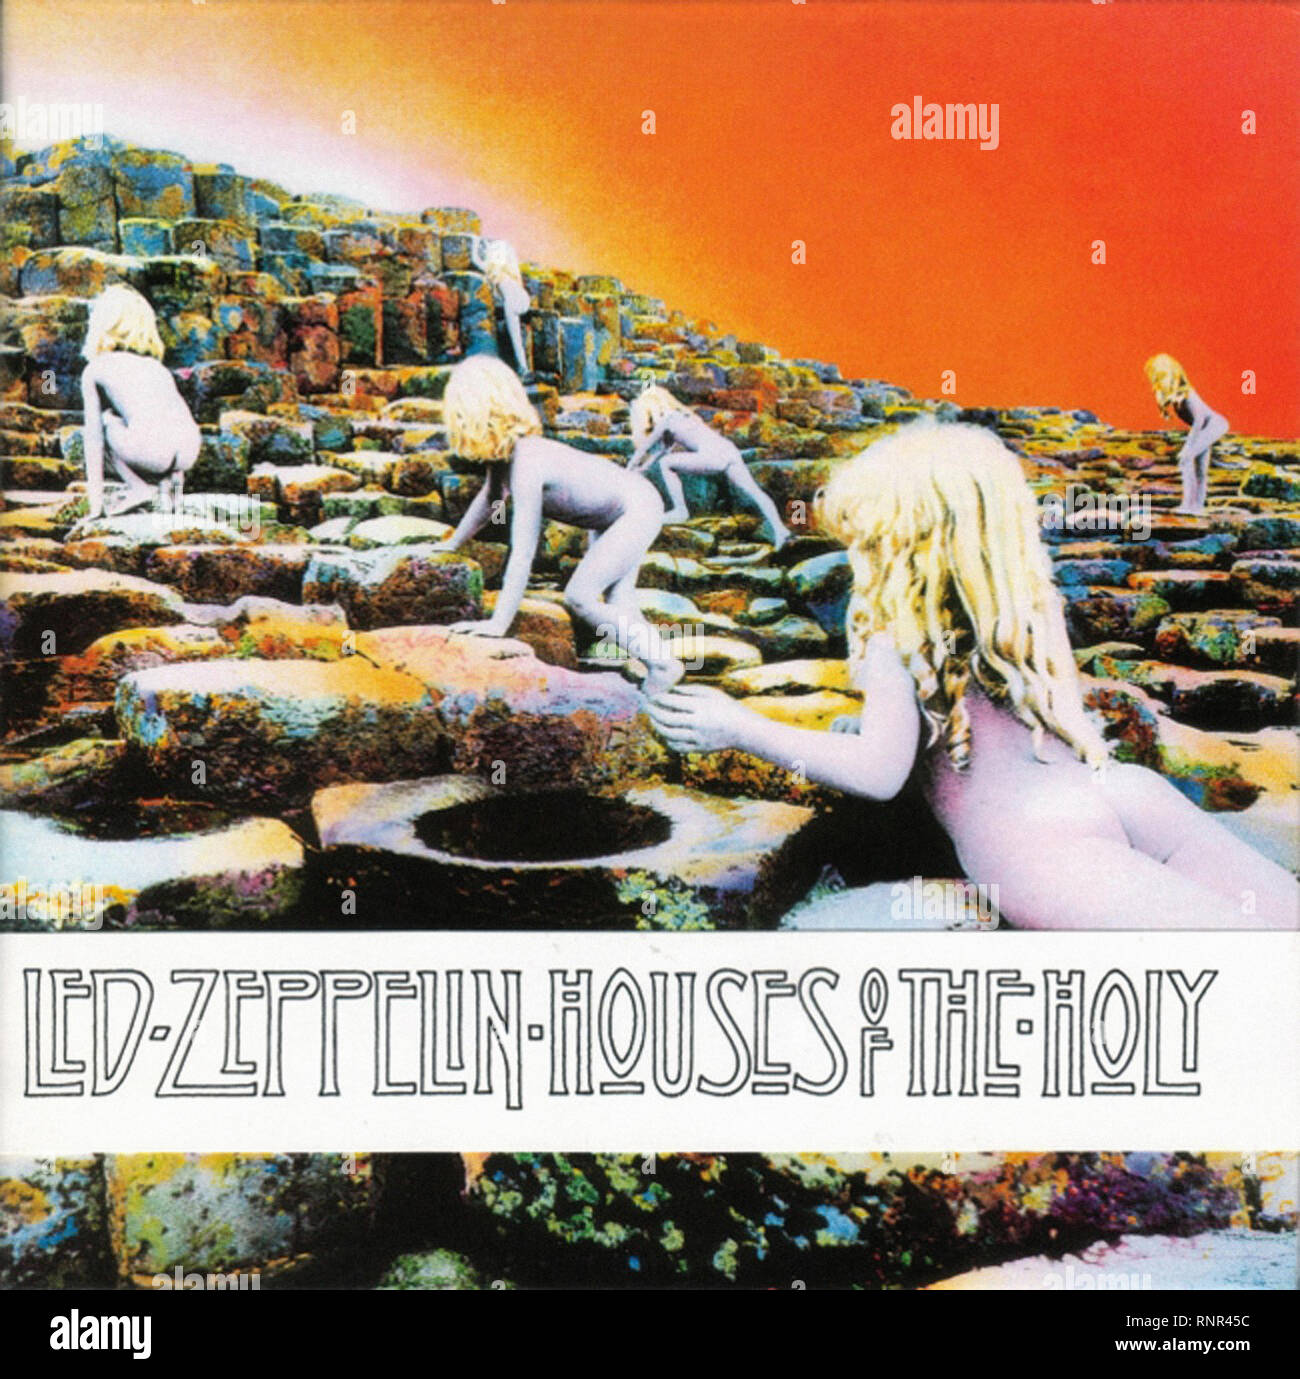 led zeppelin - Houses of the holy - Vintage Cover Album Stock Photo